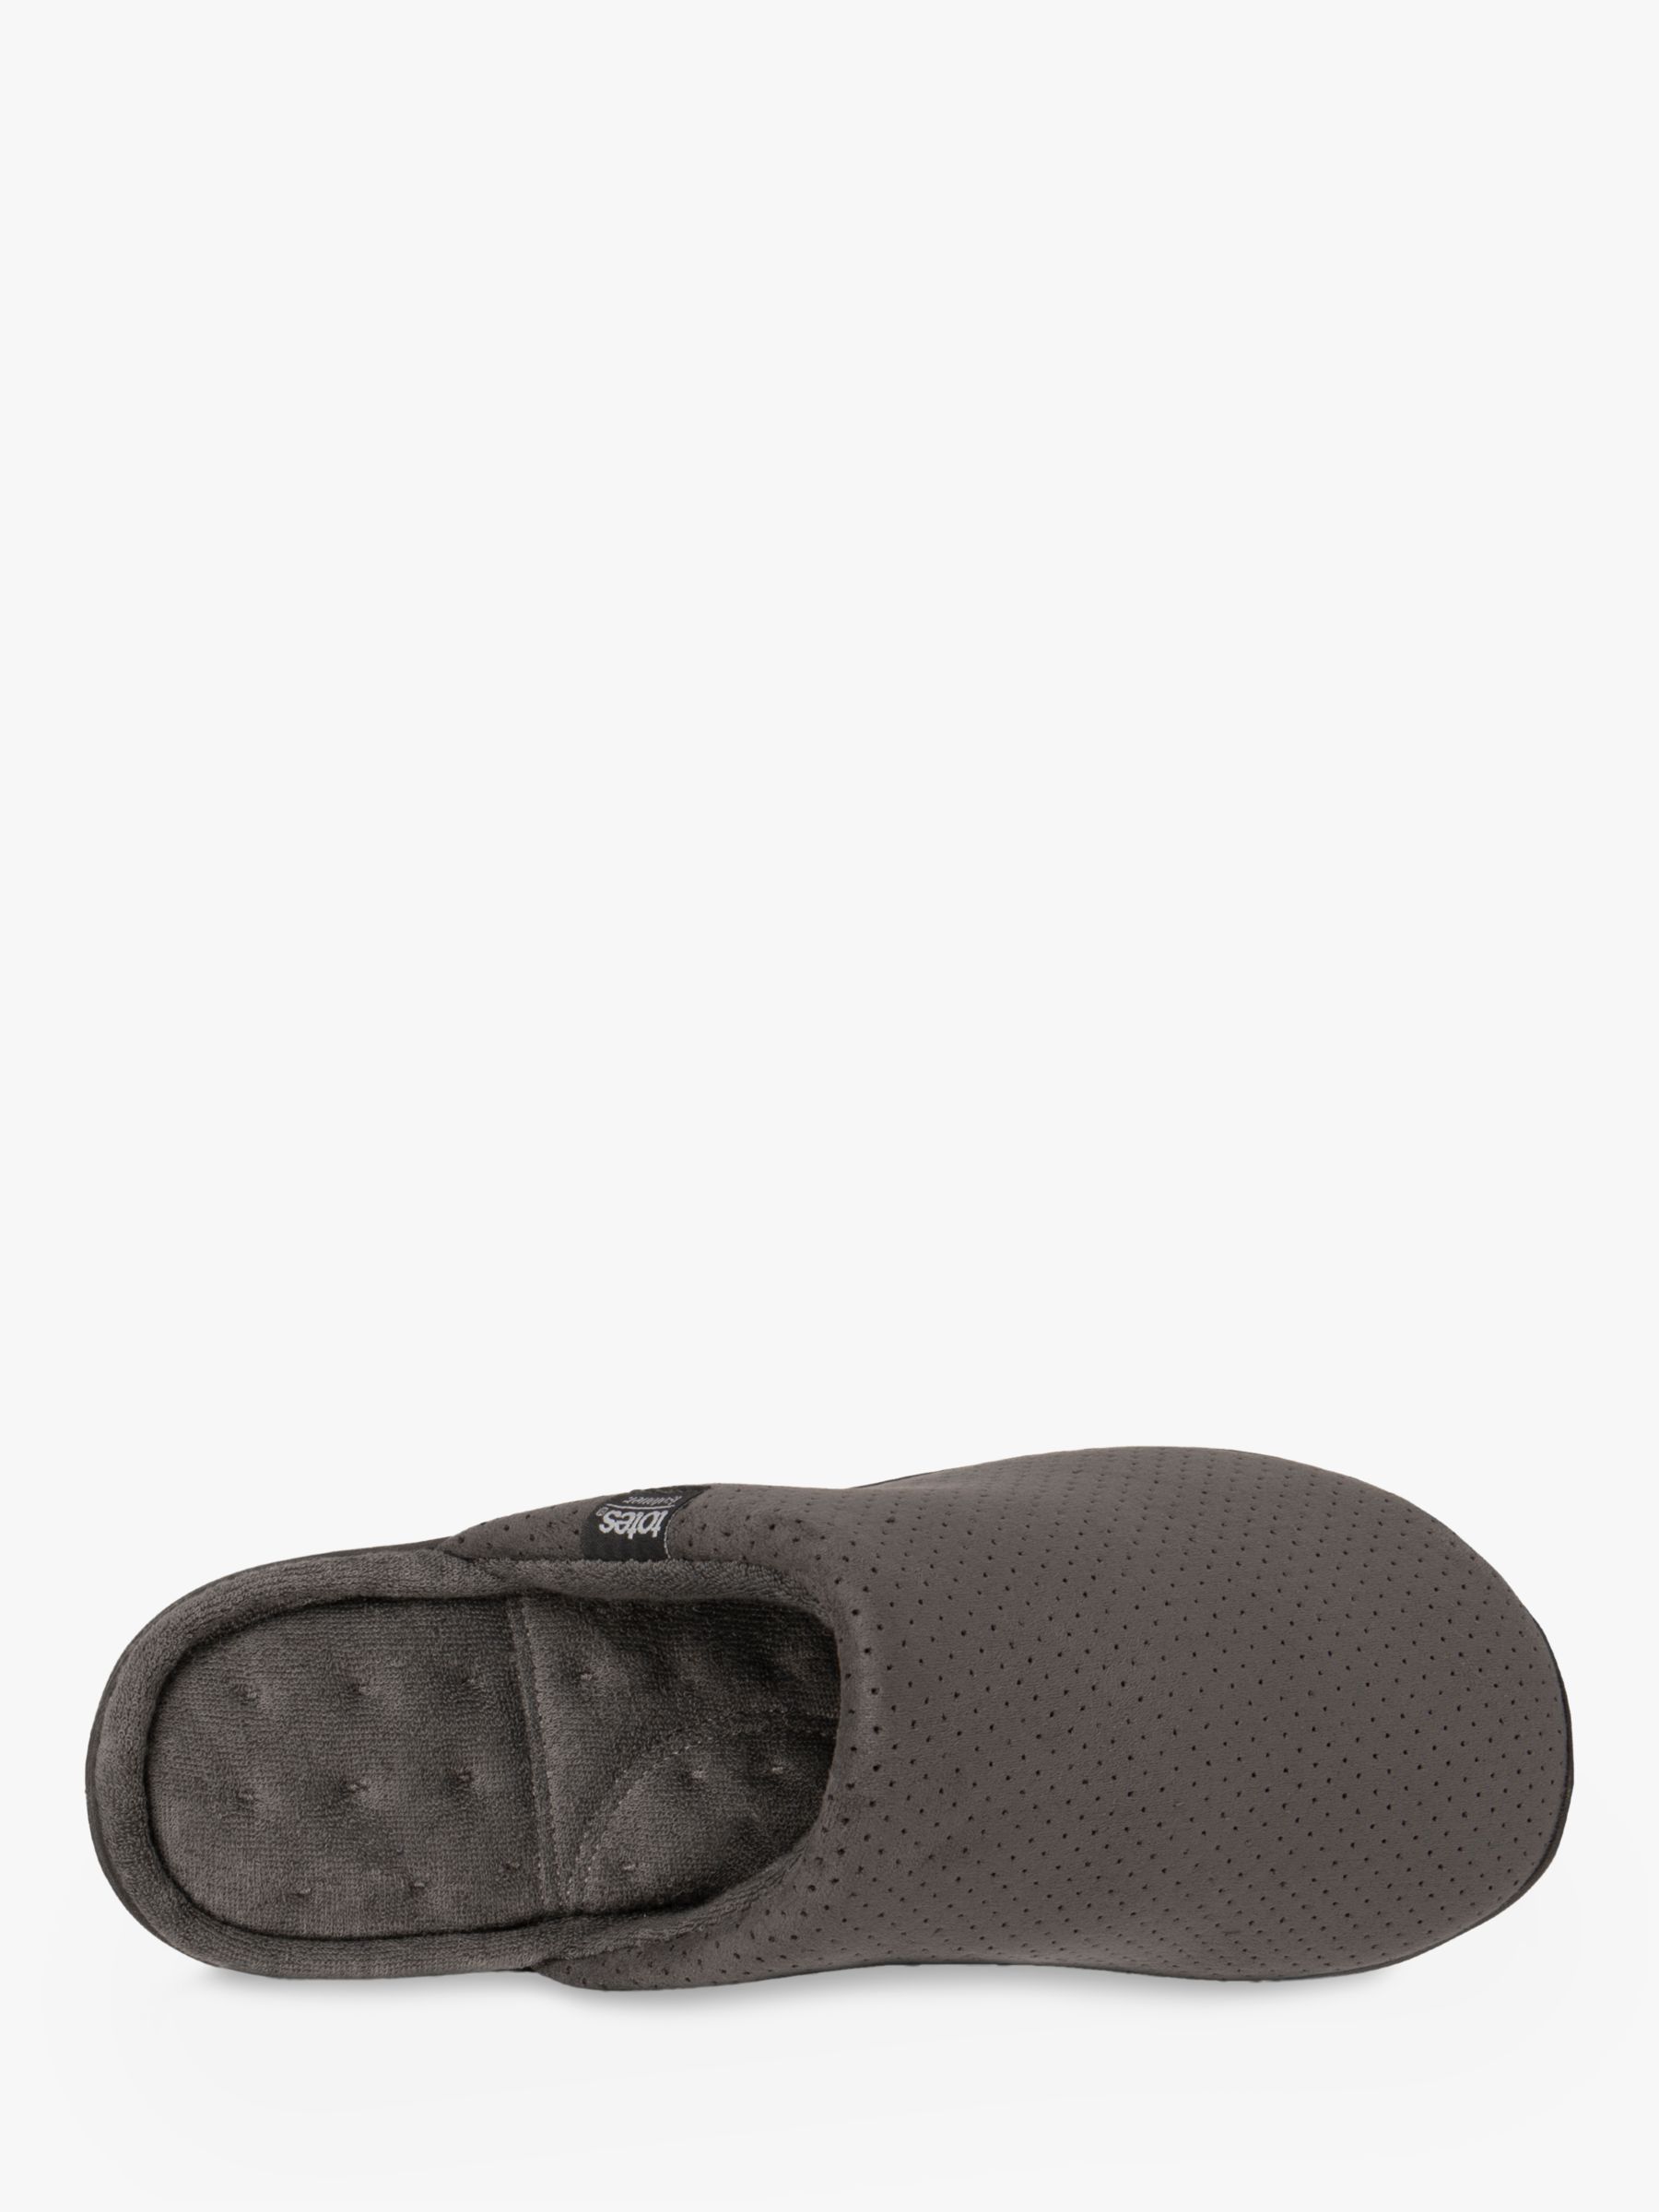 totes Airtex Suedette Mule Slippers, Grey, 8